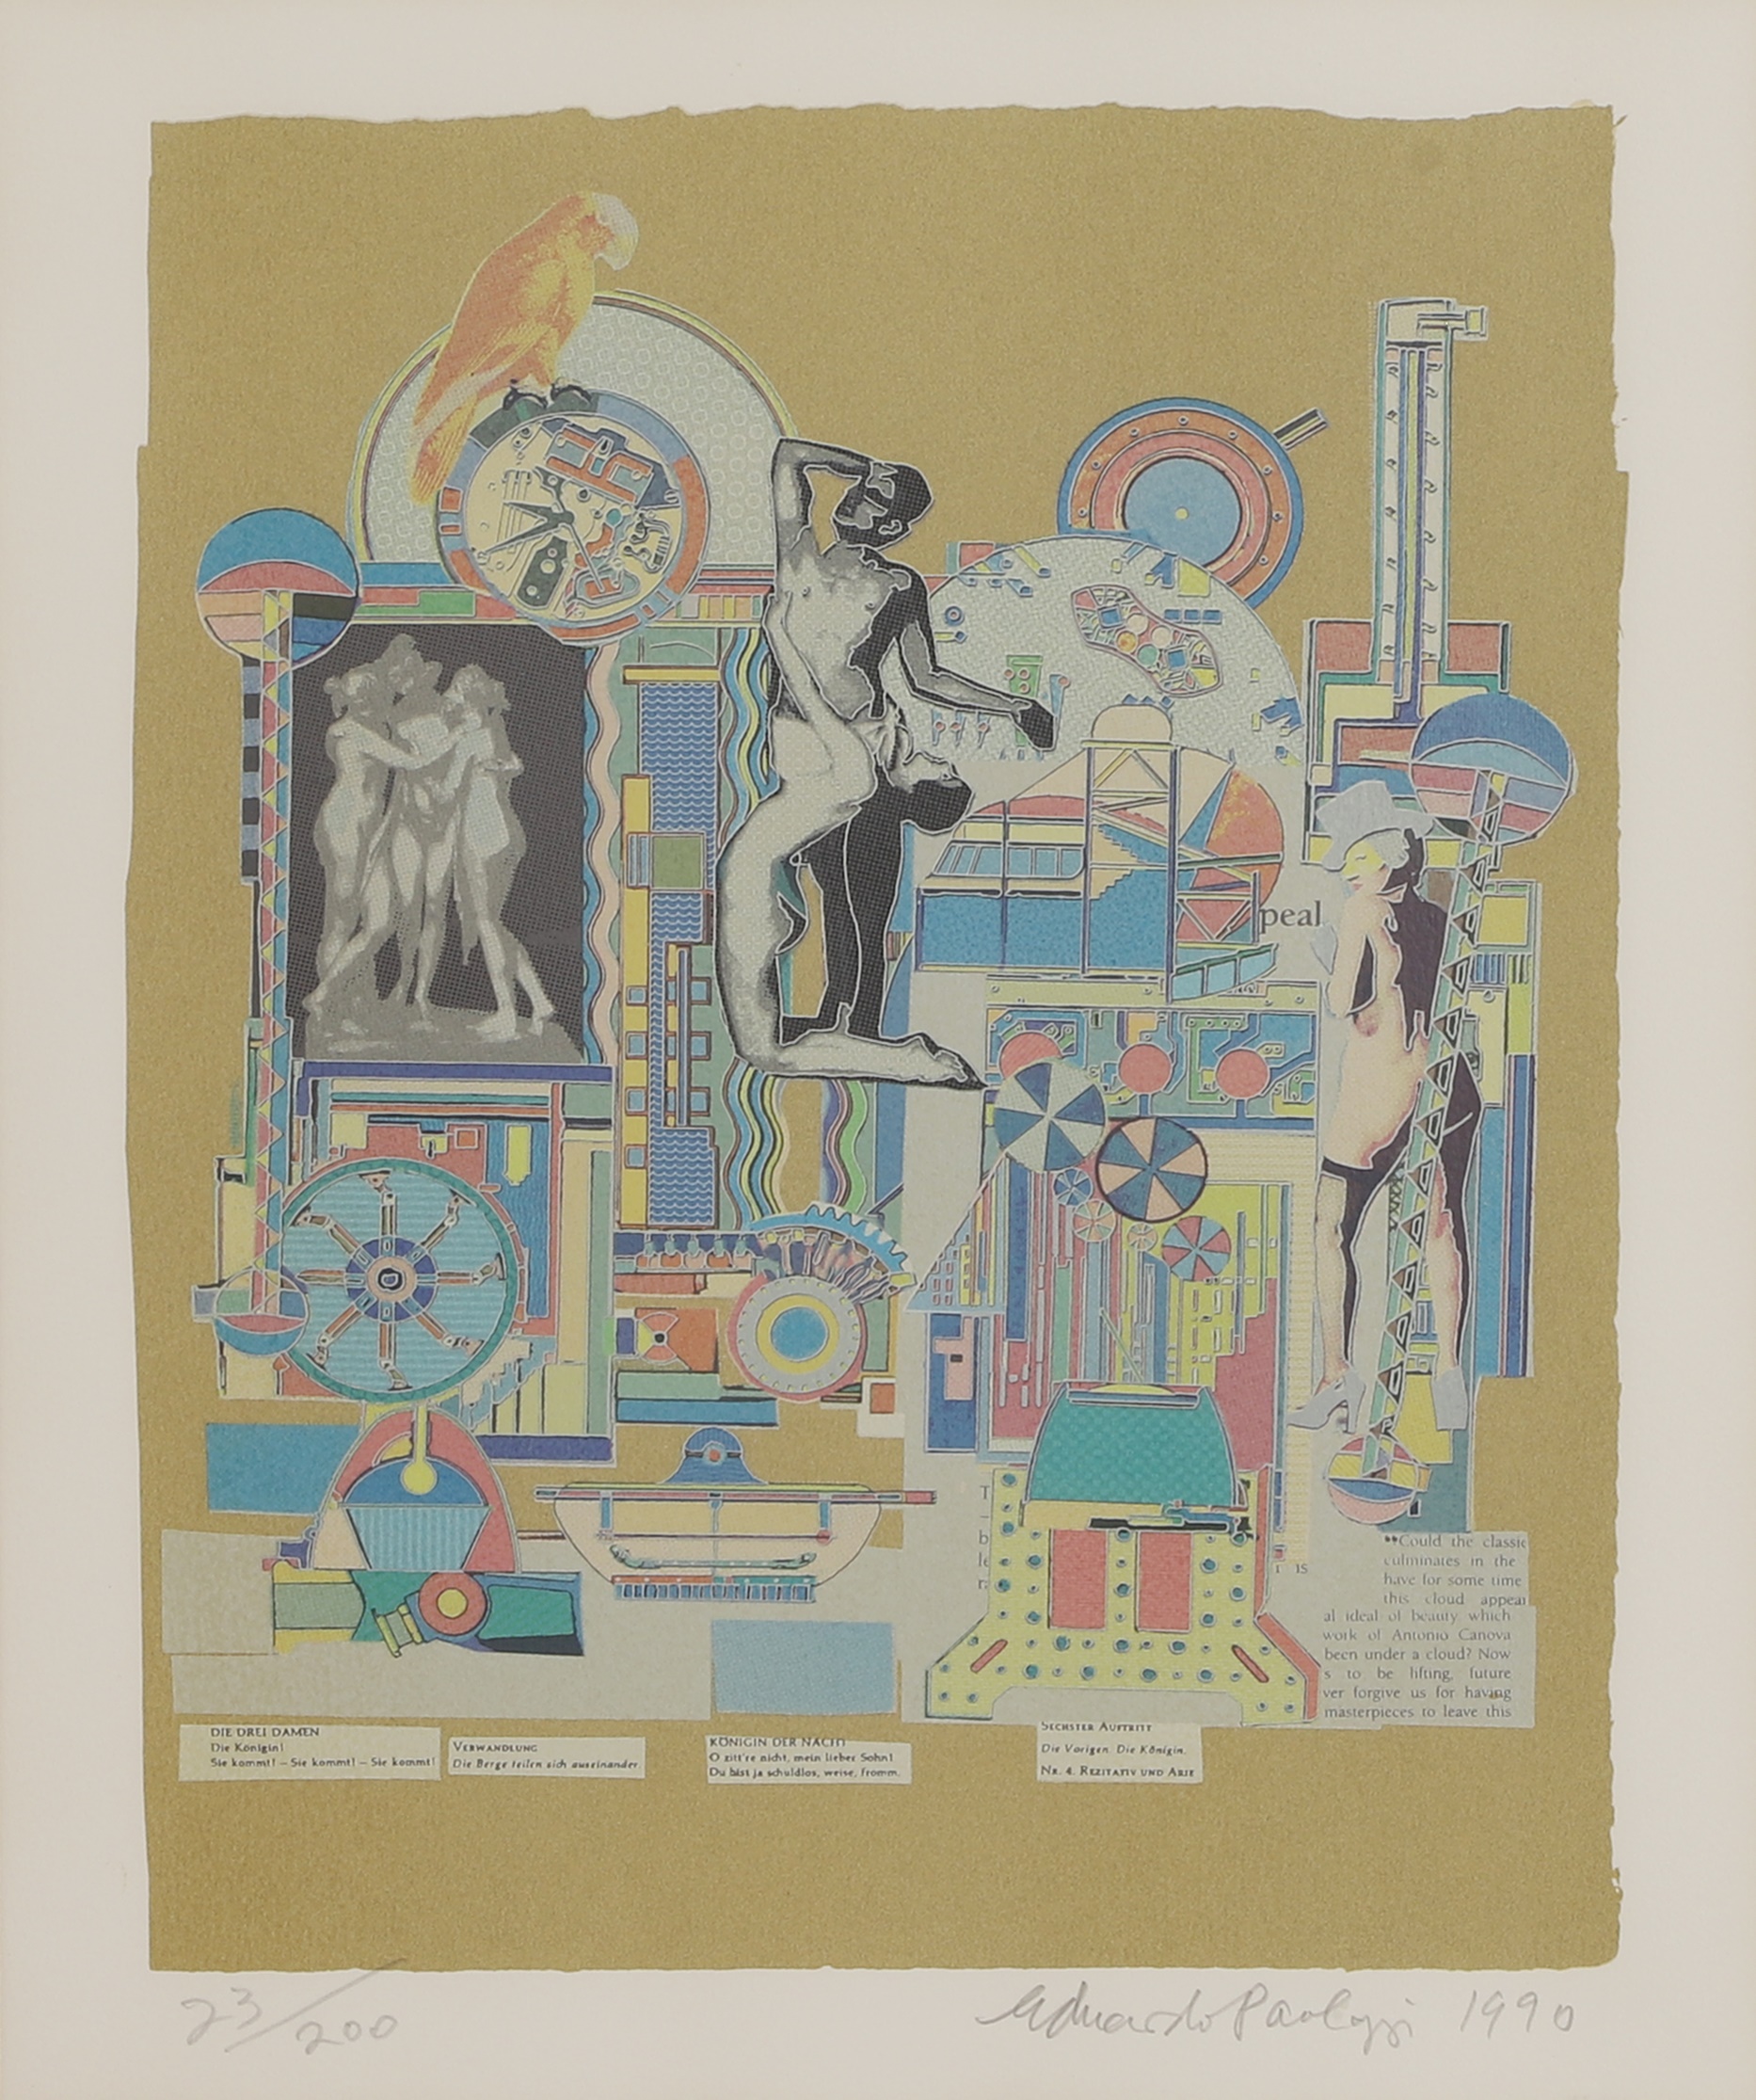 Sir Eduardo Paolozzi RA (1924-2005) 'Queen of the Night' screenprint in colours, signed and dated 'Eduardo Paolozzi 1990' in pencil l.r., numbered '23/200', printed at Advanced Graphics on 250gsm Vélin Arches blanc, part of the Mozart Portfolio published by Merivale Editions, London image 40 x 31cm (£200-300)